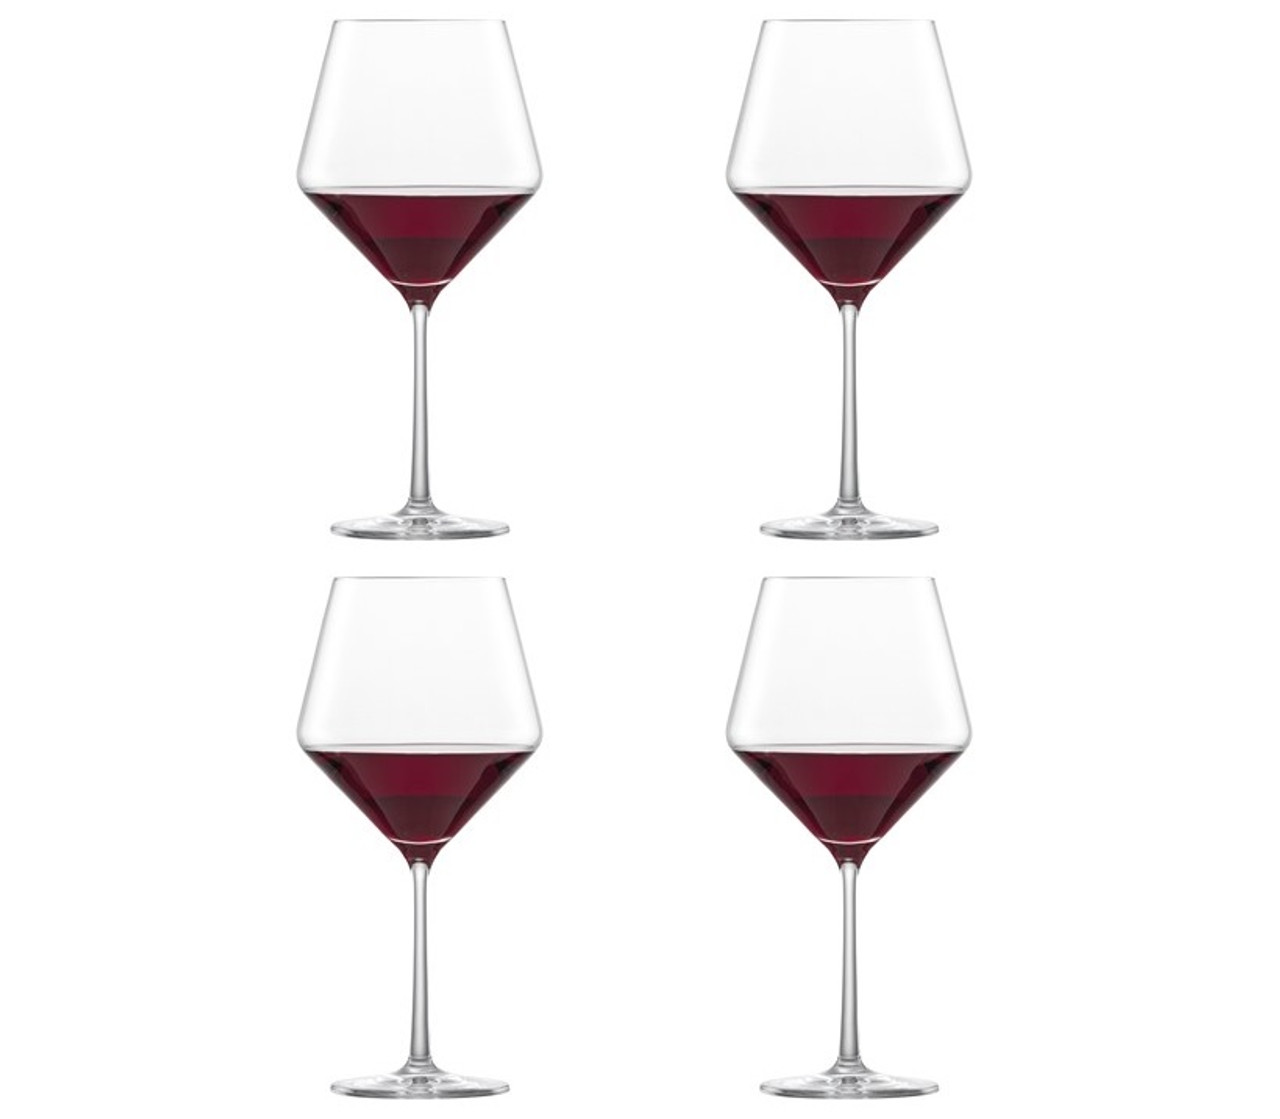 G Francis Large 'Red Wine' Glasses Set of 4-20oz Slant Rim Wine Glass with  Long Stems Drinking Crystal Wine Glasses